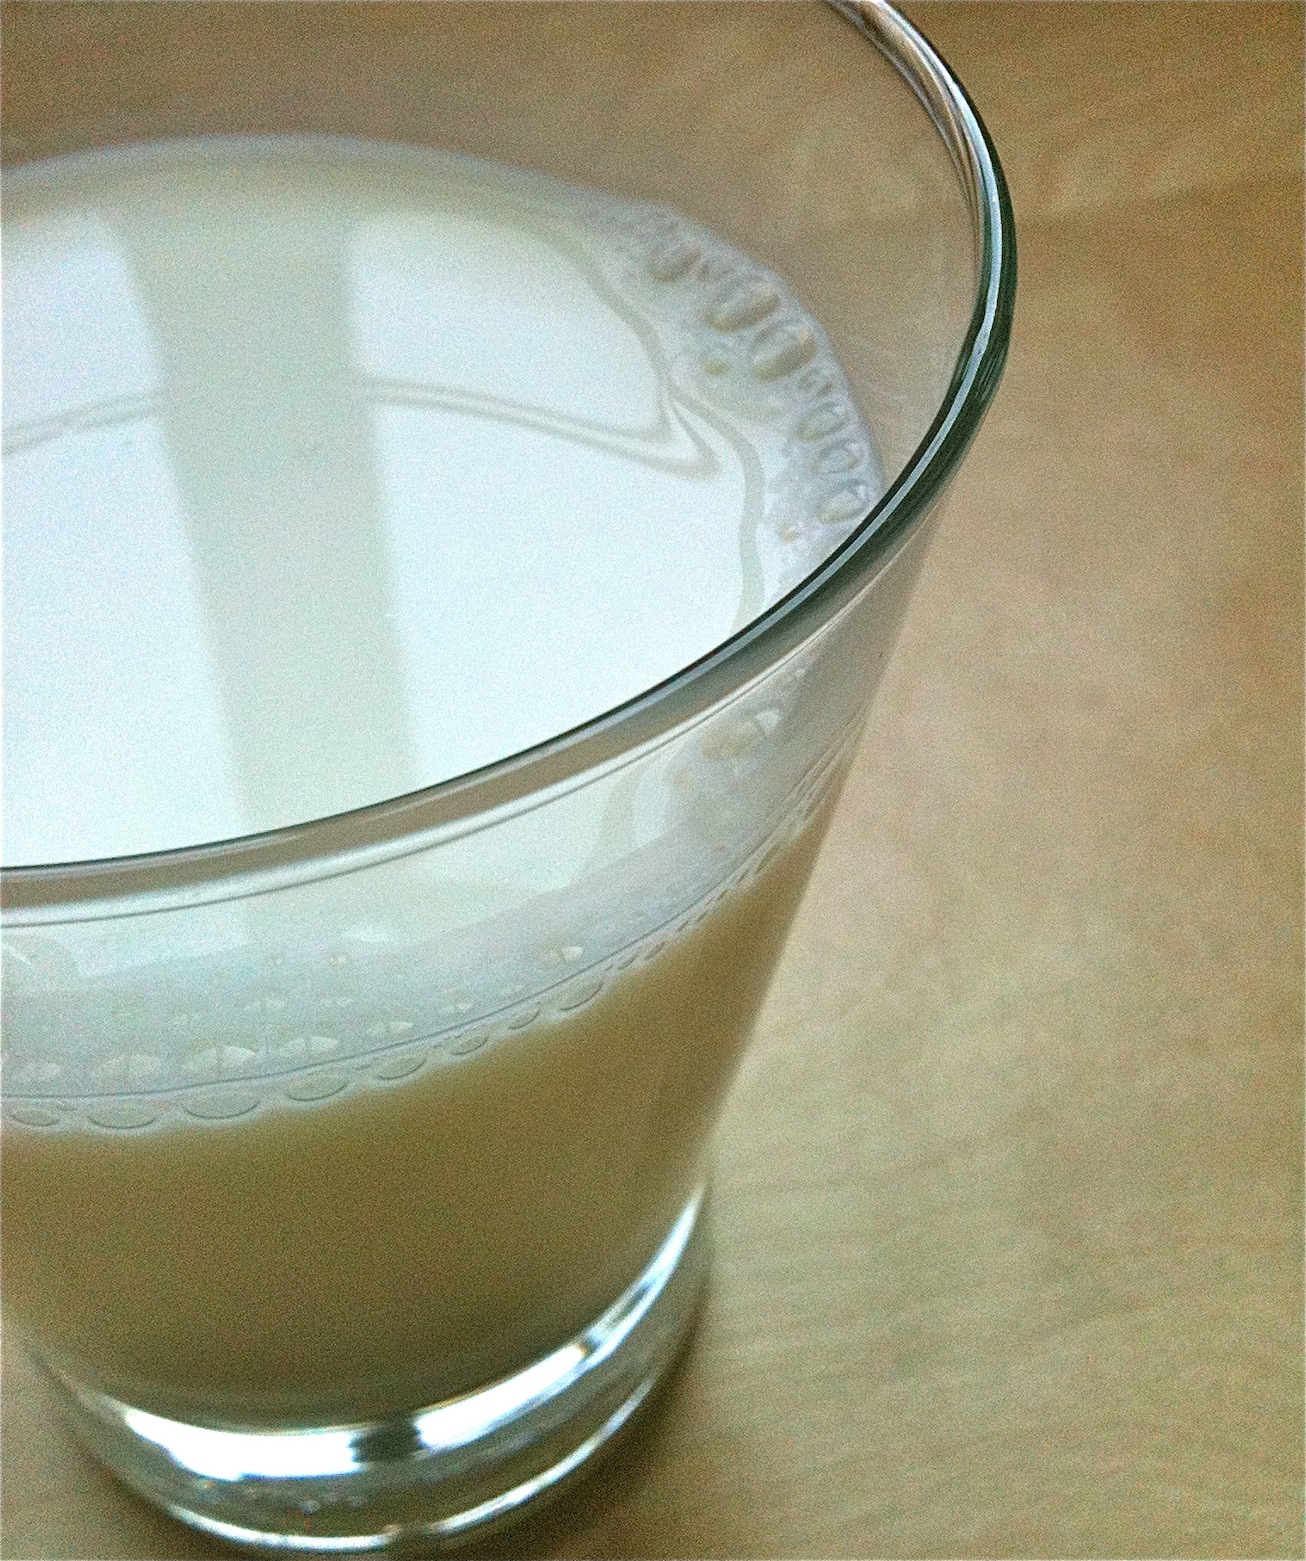 What does your nutritionist think about drinking milk?